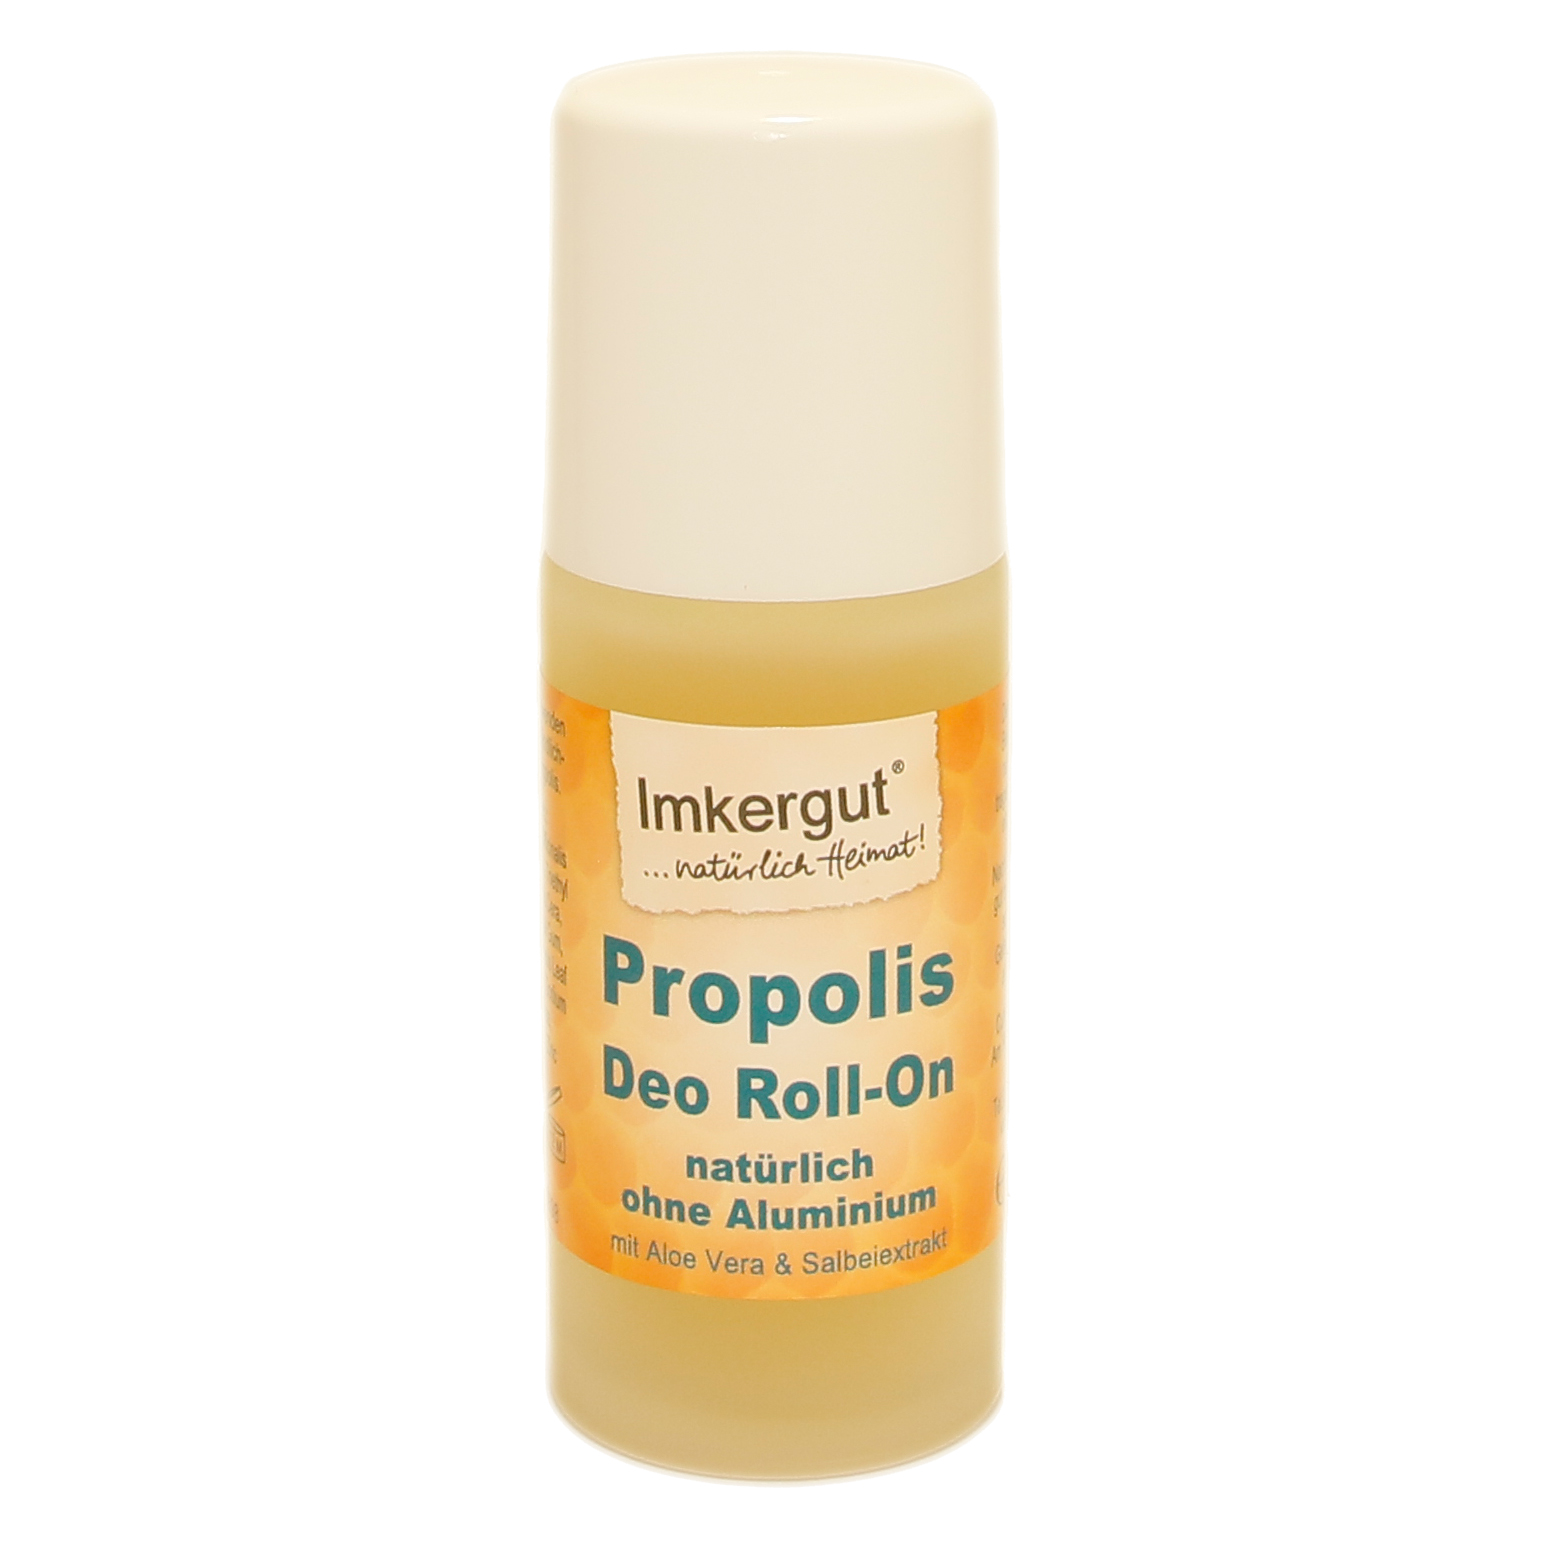 Deo Roll-On: Propolis